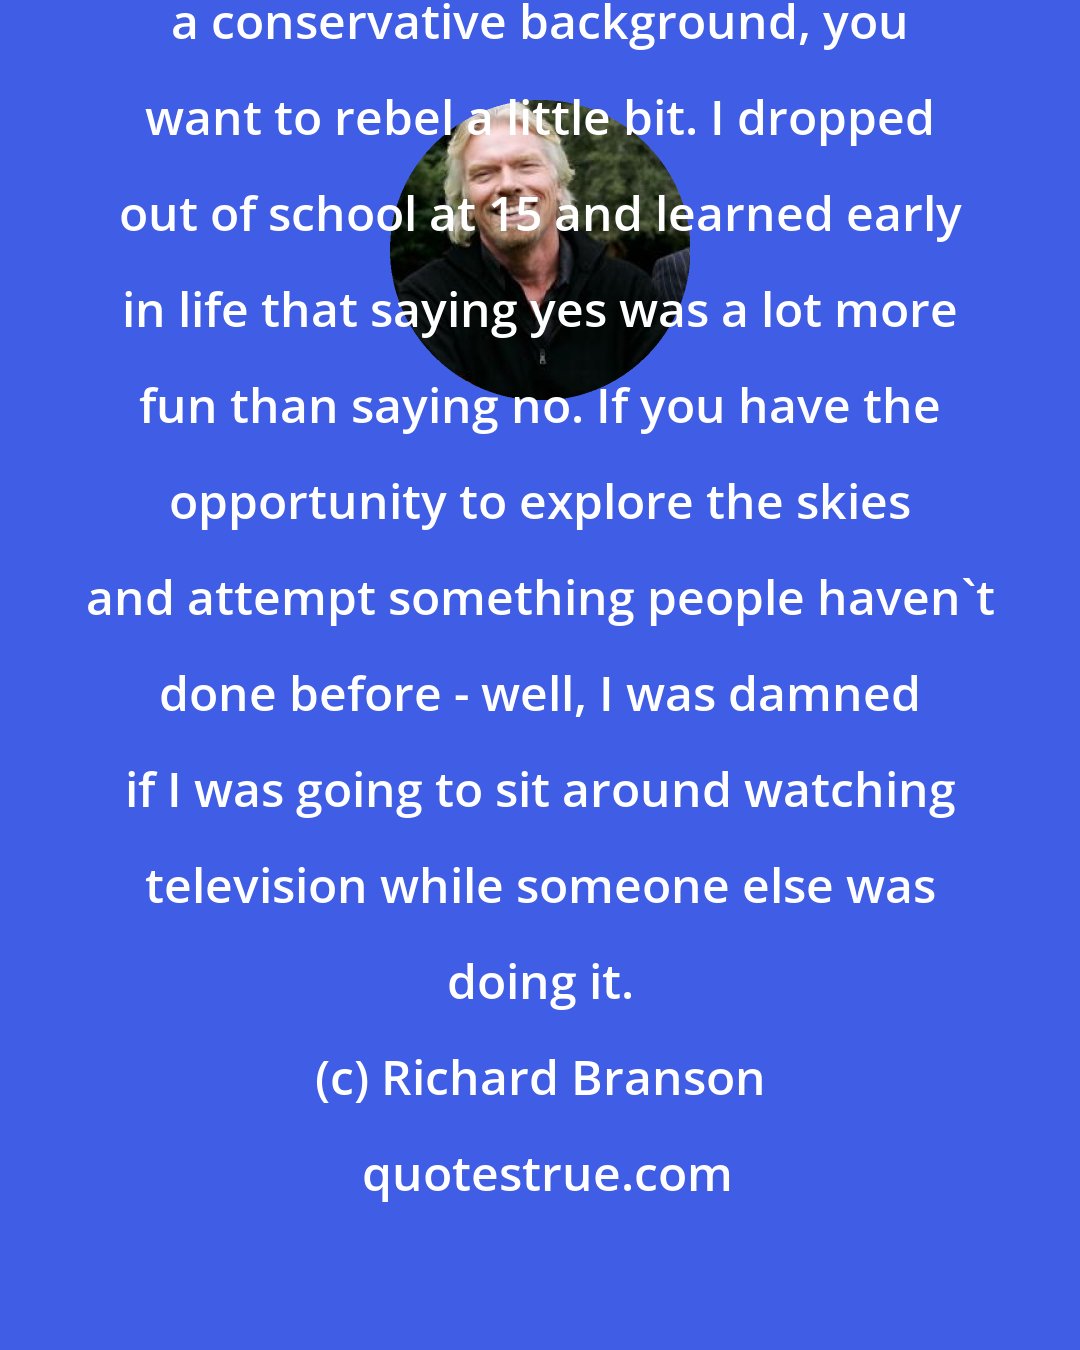 Richard Branson: I think sometimes when you come from a conservative background, you want to rebel a little bit. I dropped out of school at 15 and learned early in life that saying yes was a lot more fun than saying no. If you have the opportunity to explore the skies and attempt something people haven't done before - well, I was damned if I was going to sit around watching television while someone else was doing it.